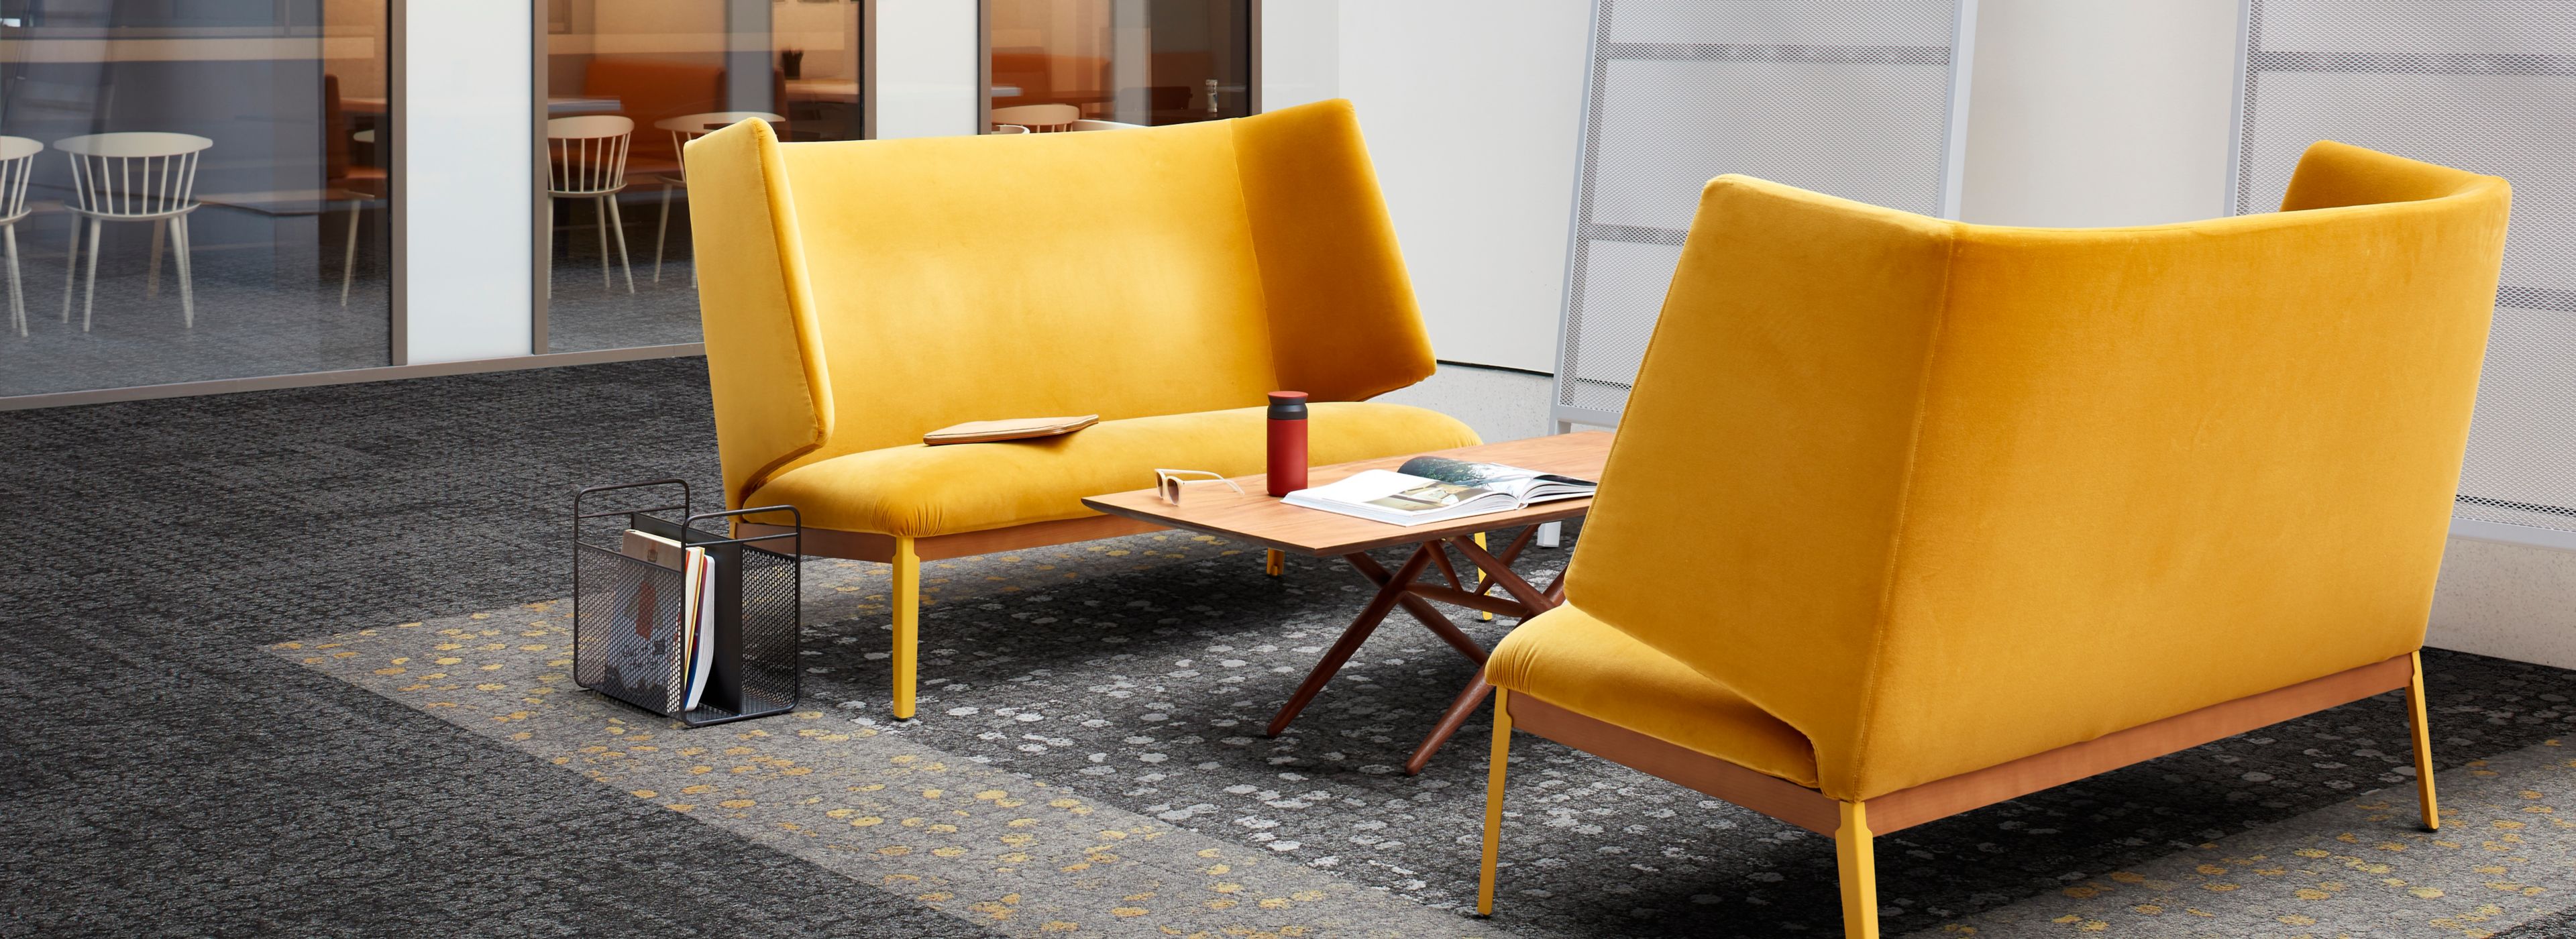 Interface Mercer Street and Broome Street carpet tile in seating area with two yellow couches Bildnummer 1